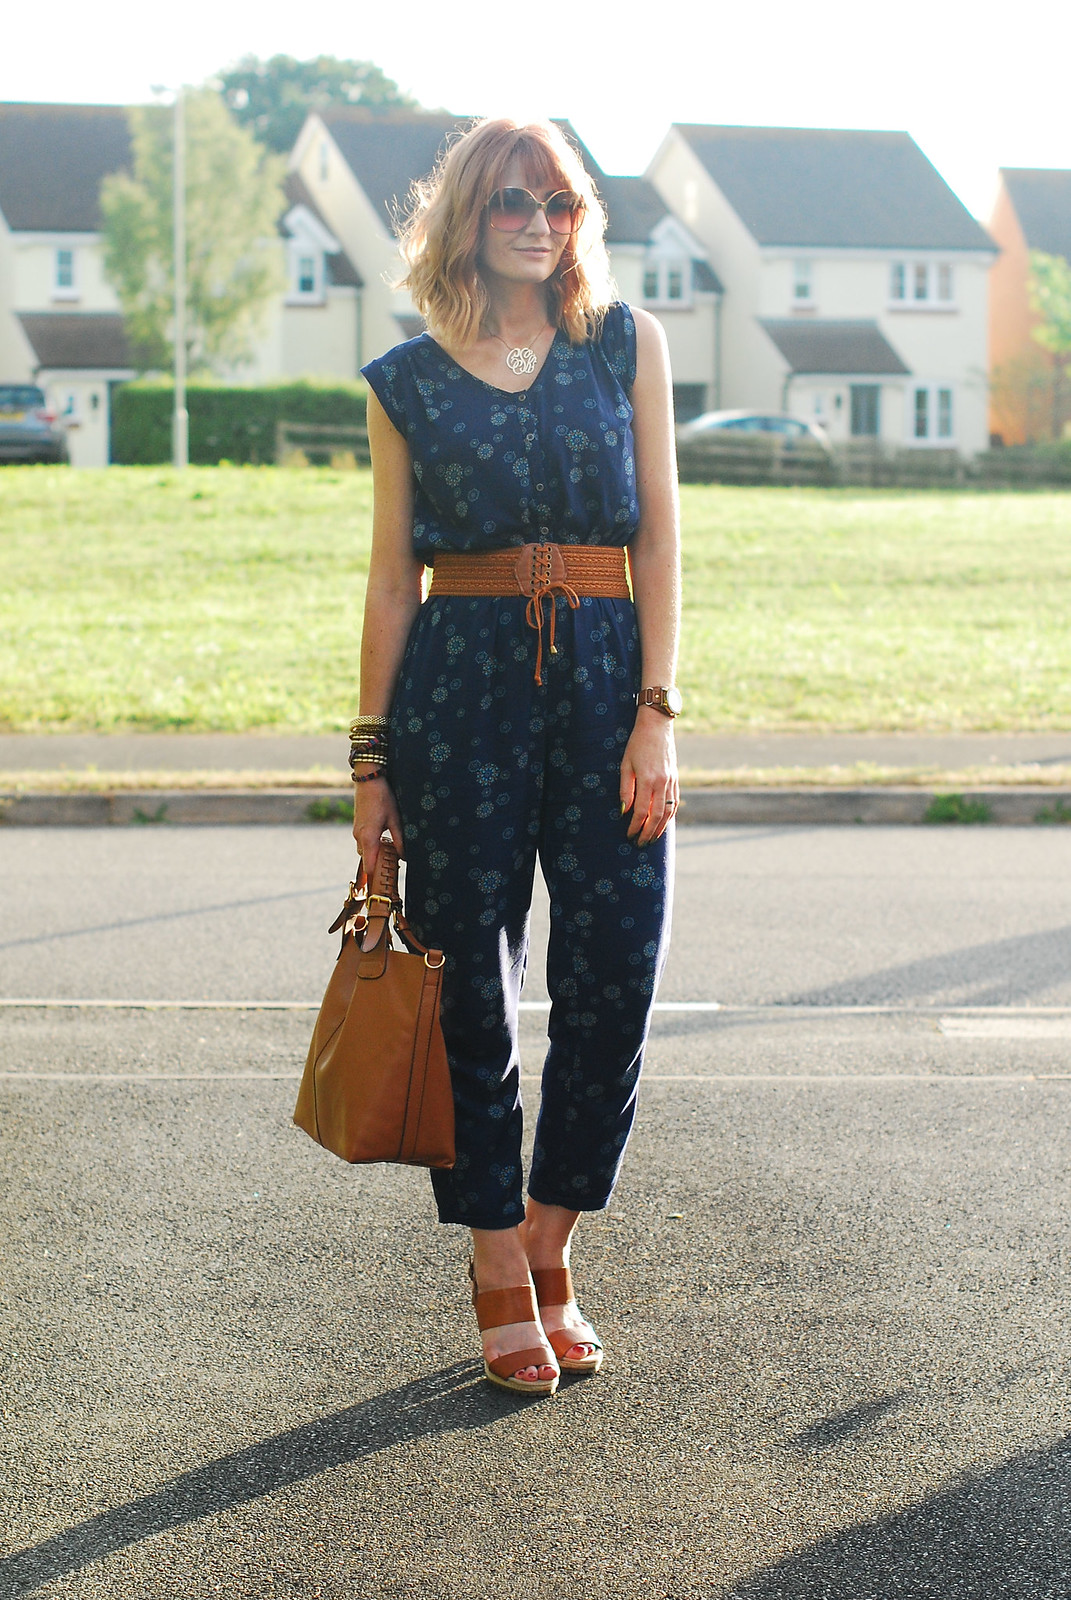 Simple summer styling: Blue floral jumpsuit with tan accessories | Not Dressed As Lamb